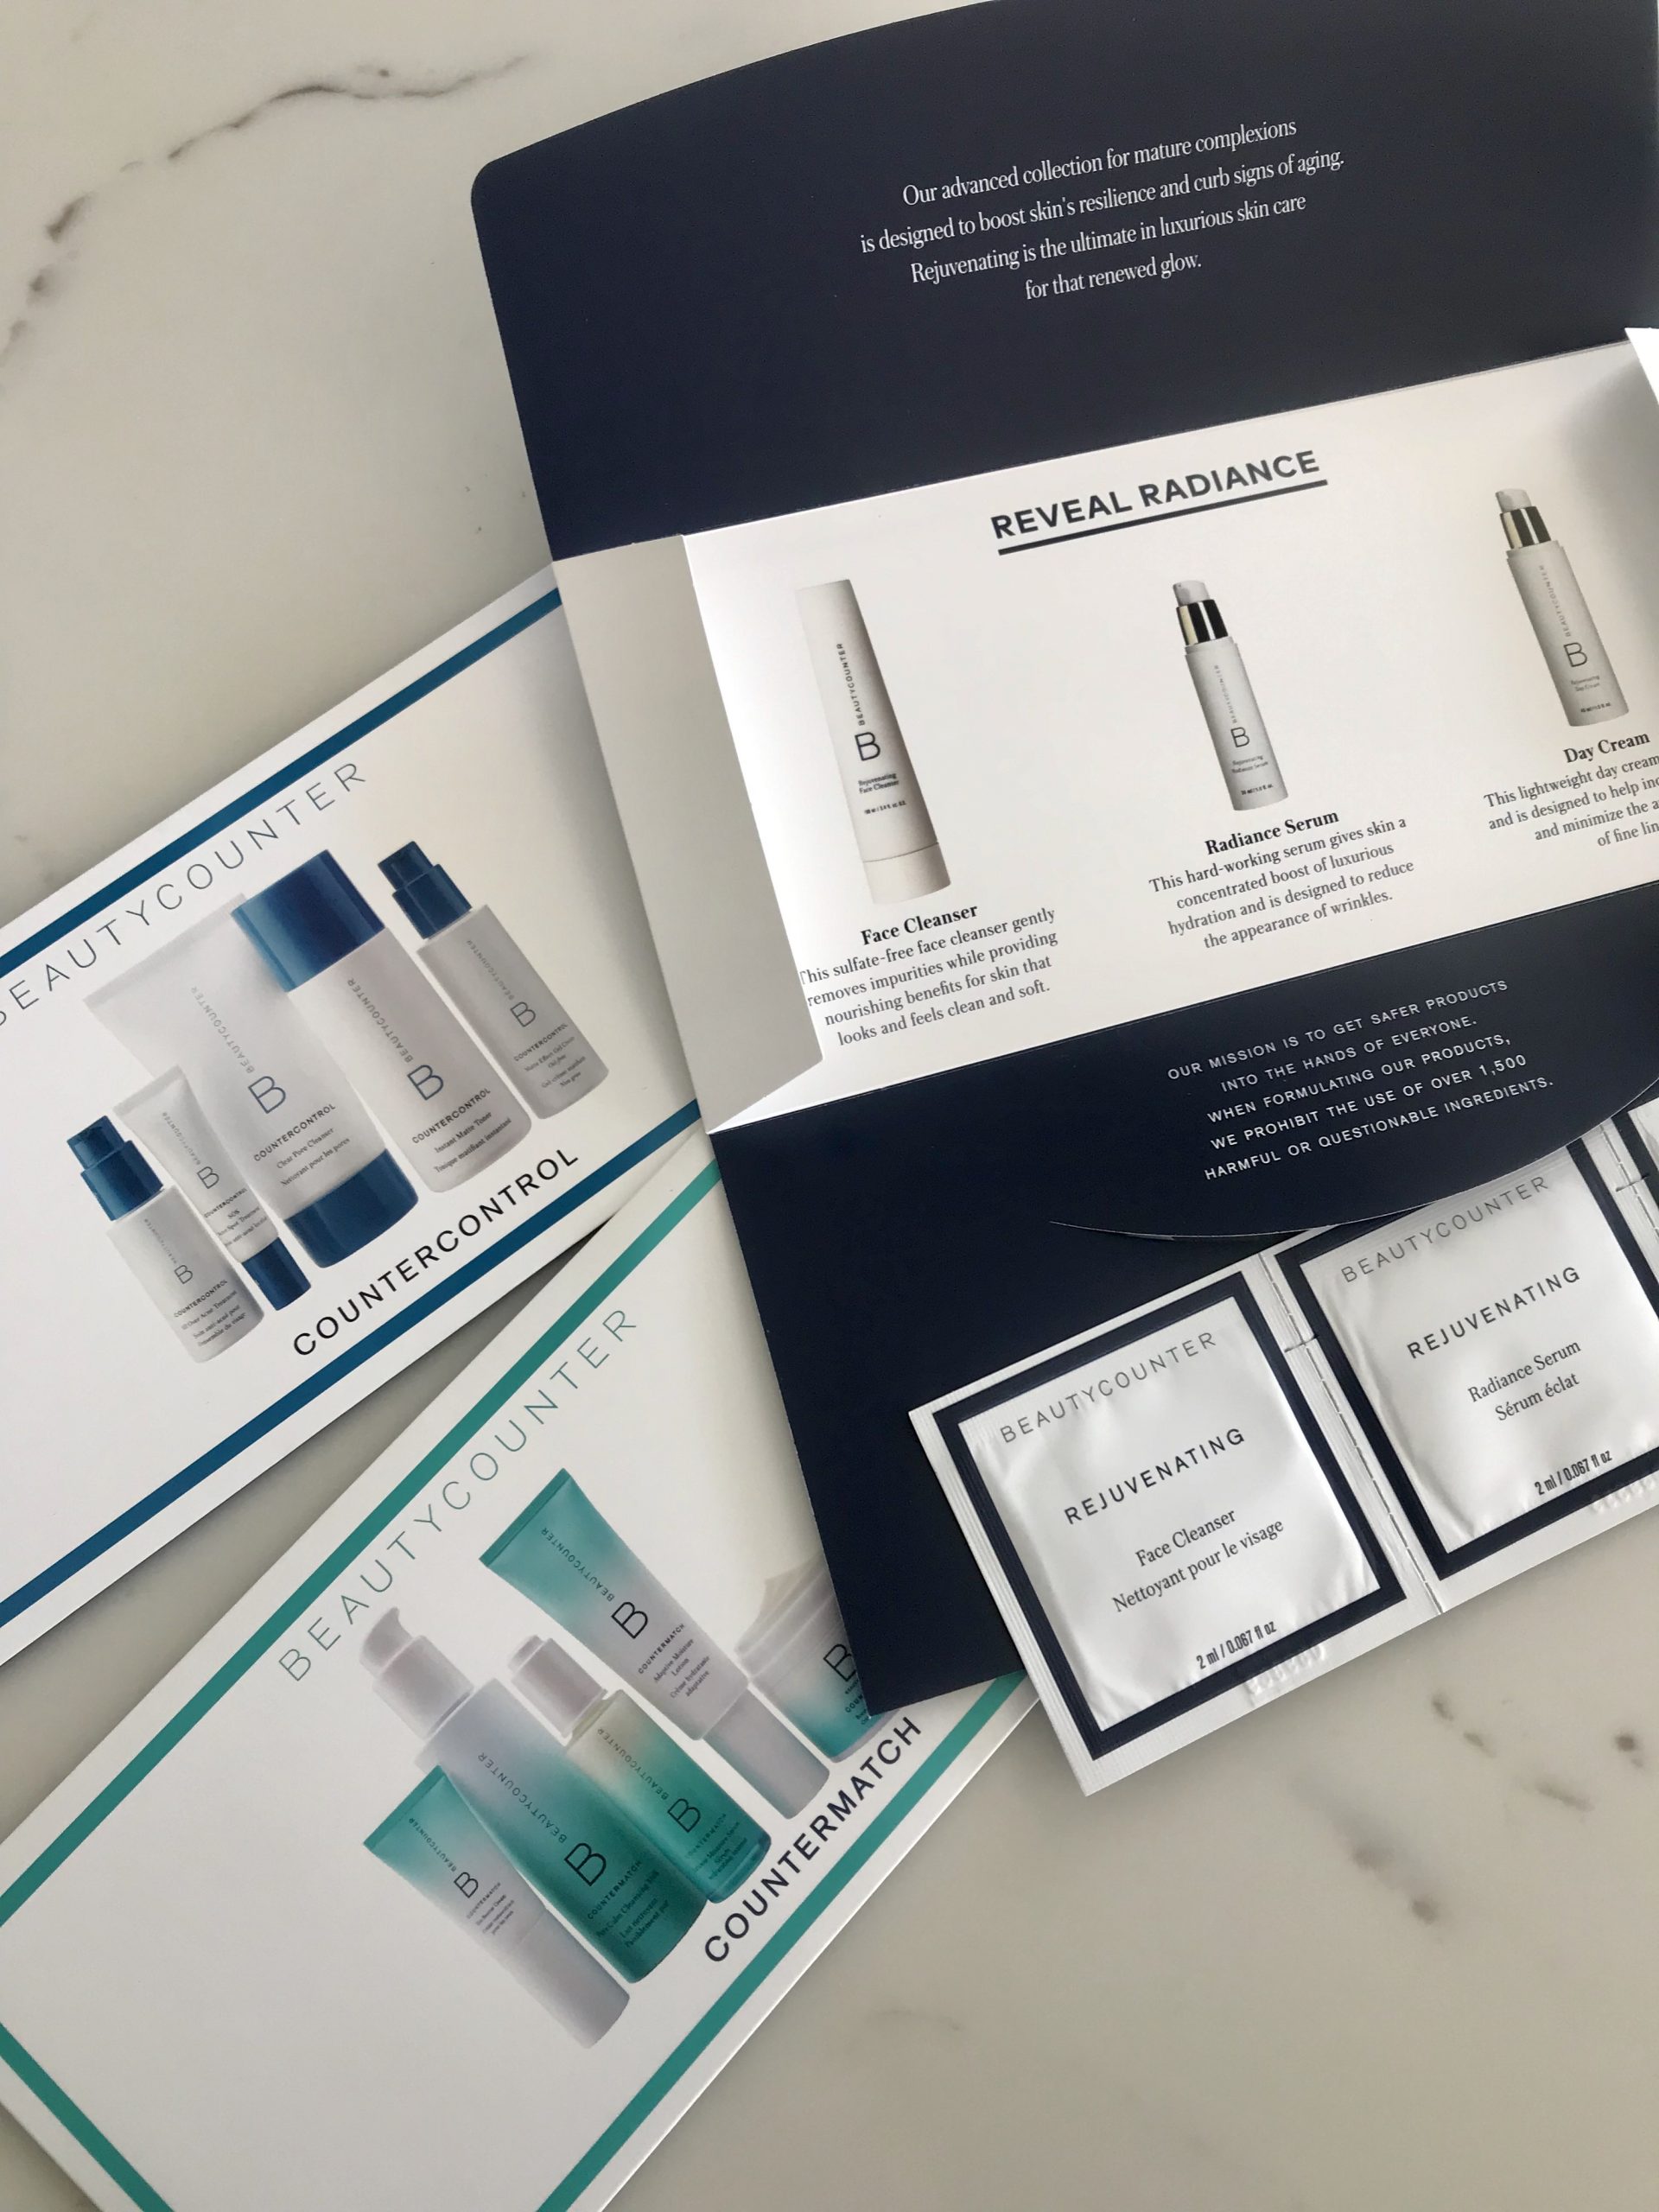 Why I started selling Beautycounter products